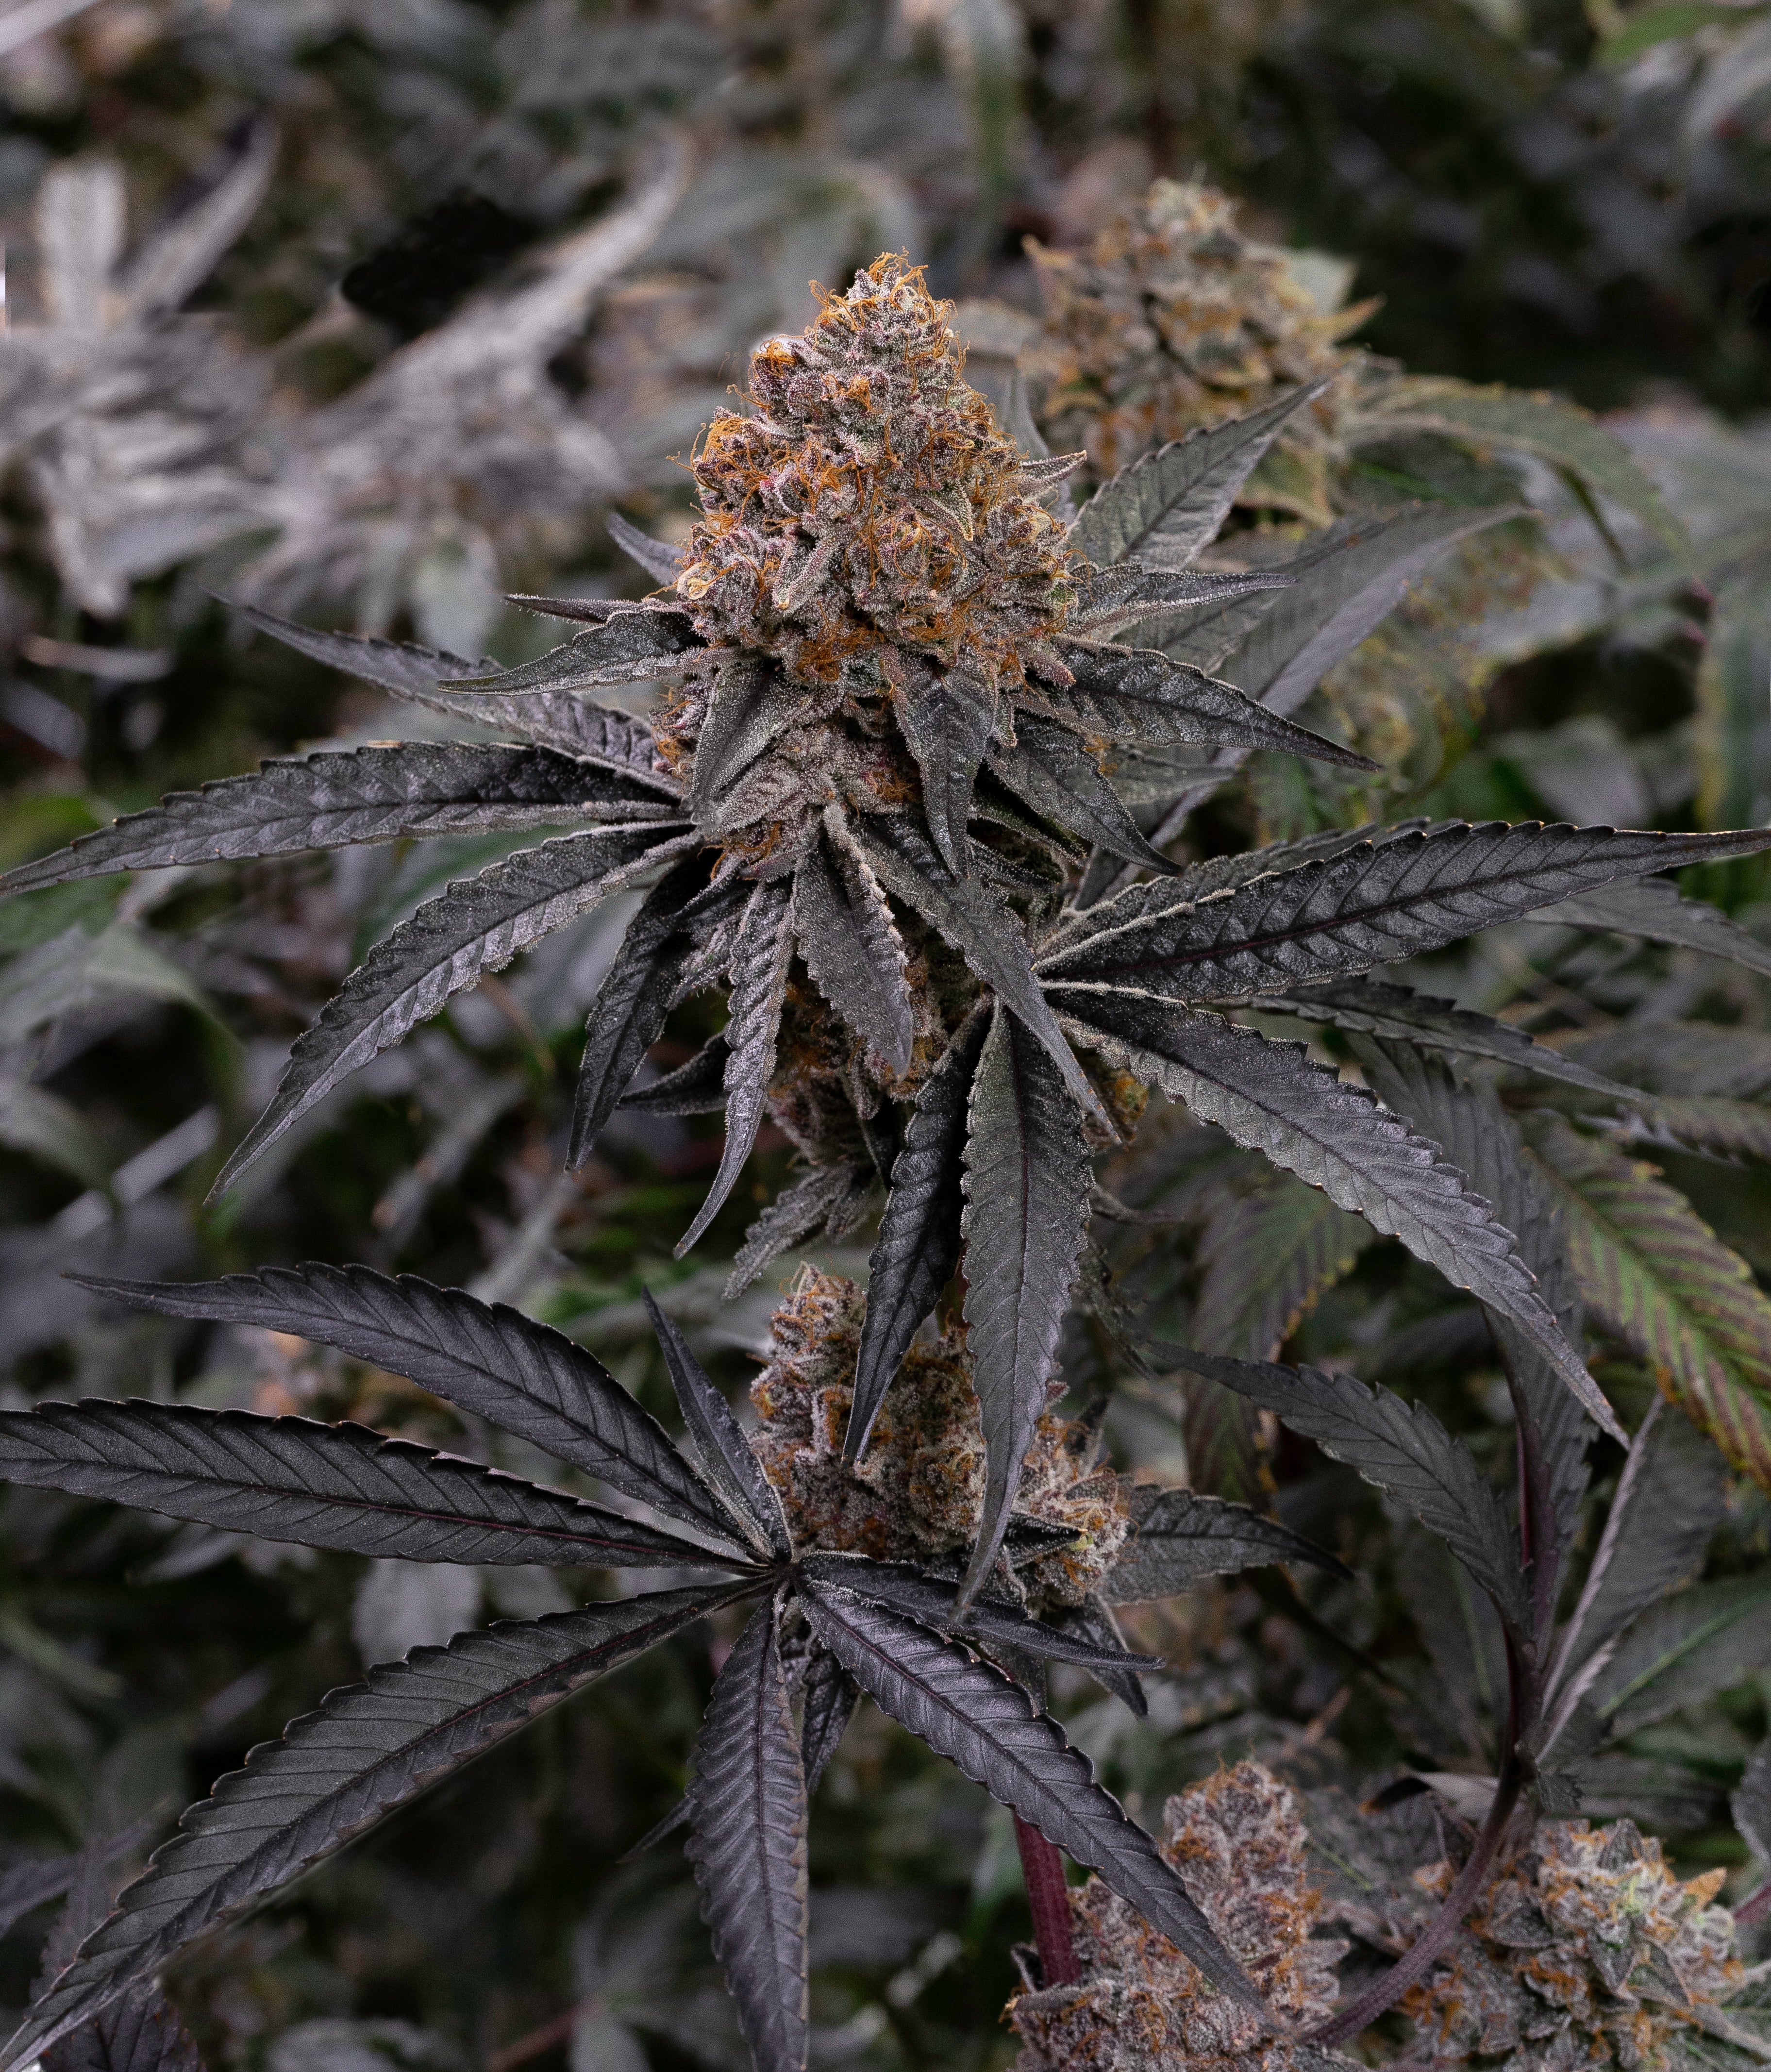 A cannabis flower stalk bearing large nugs and dark green leaves stands tall in a commercial grow room.